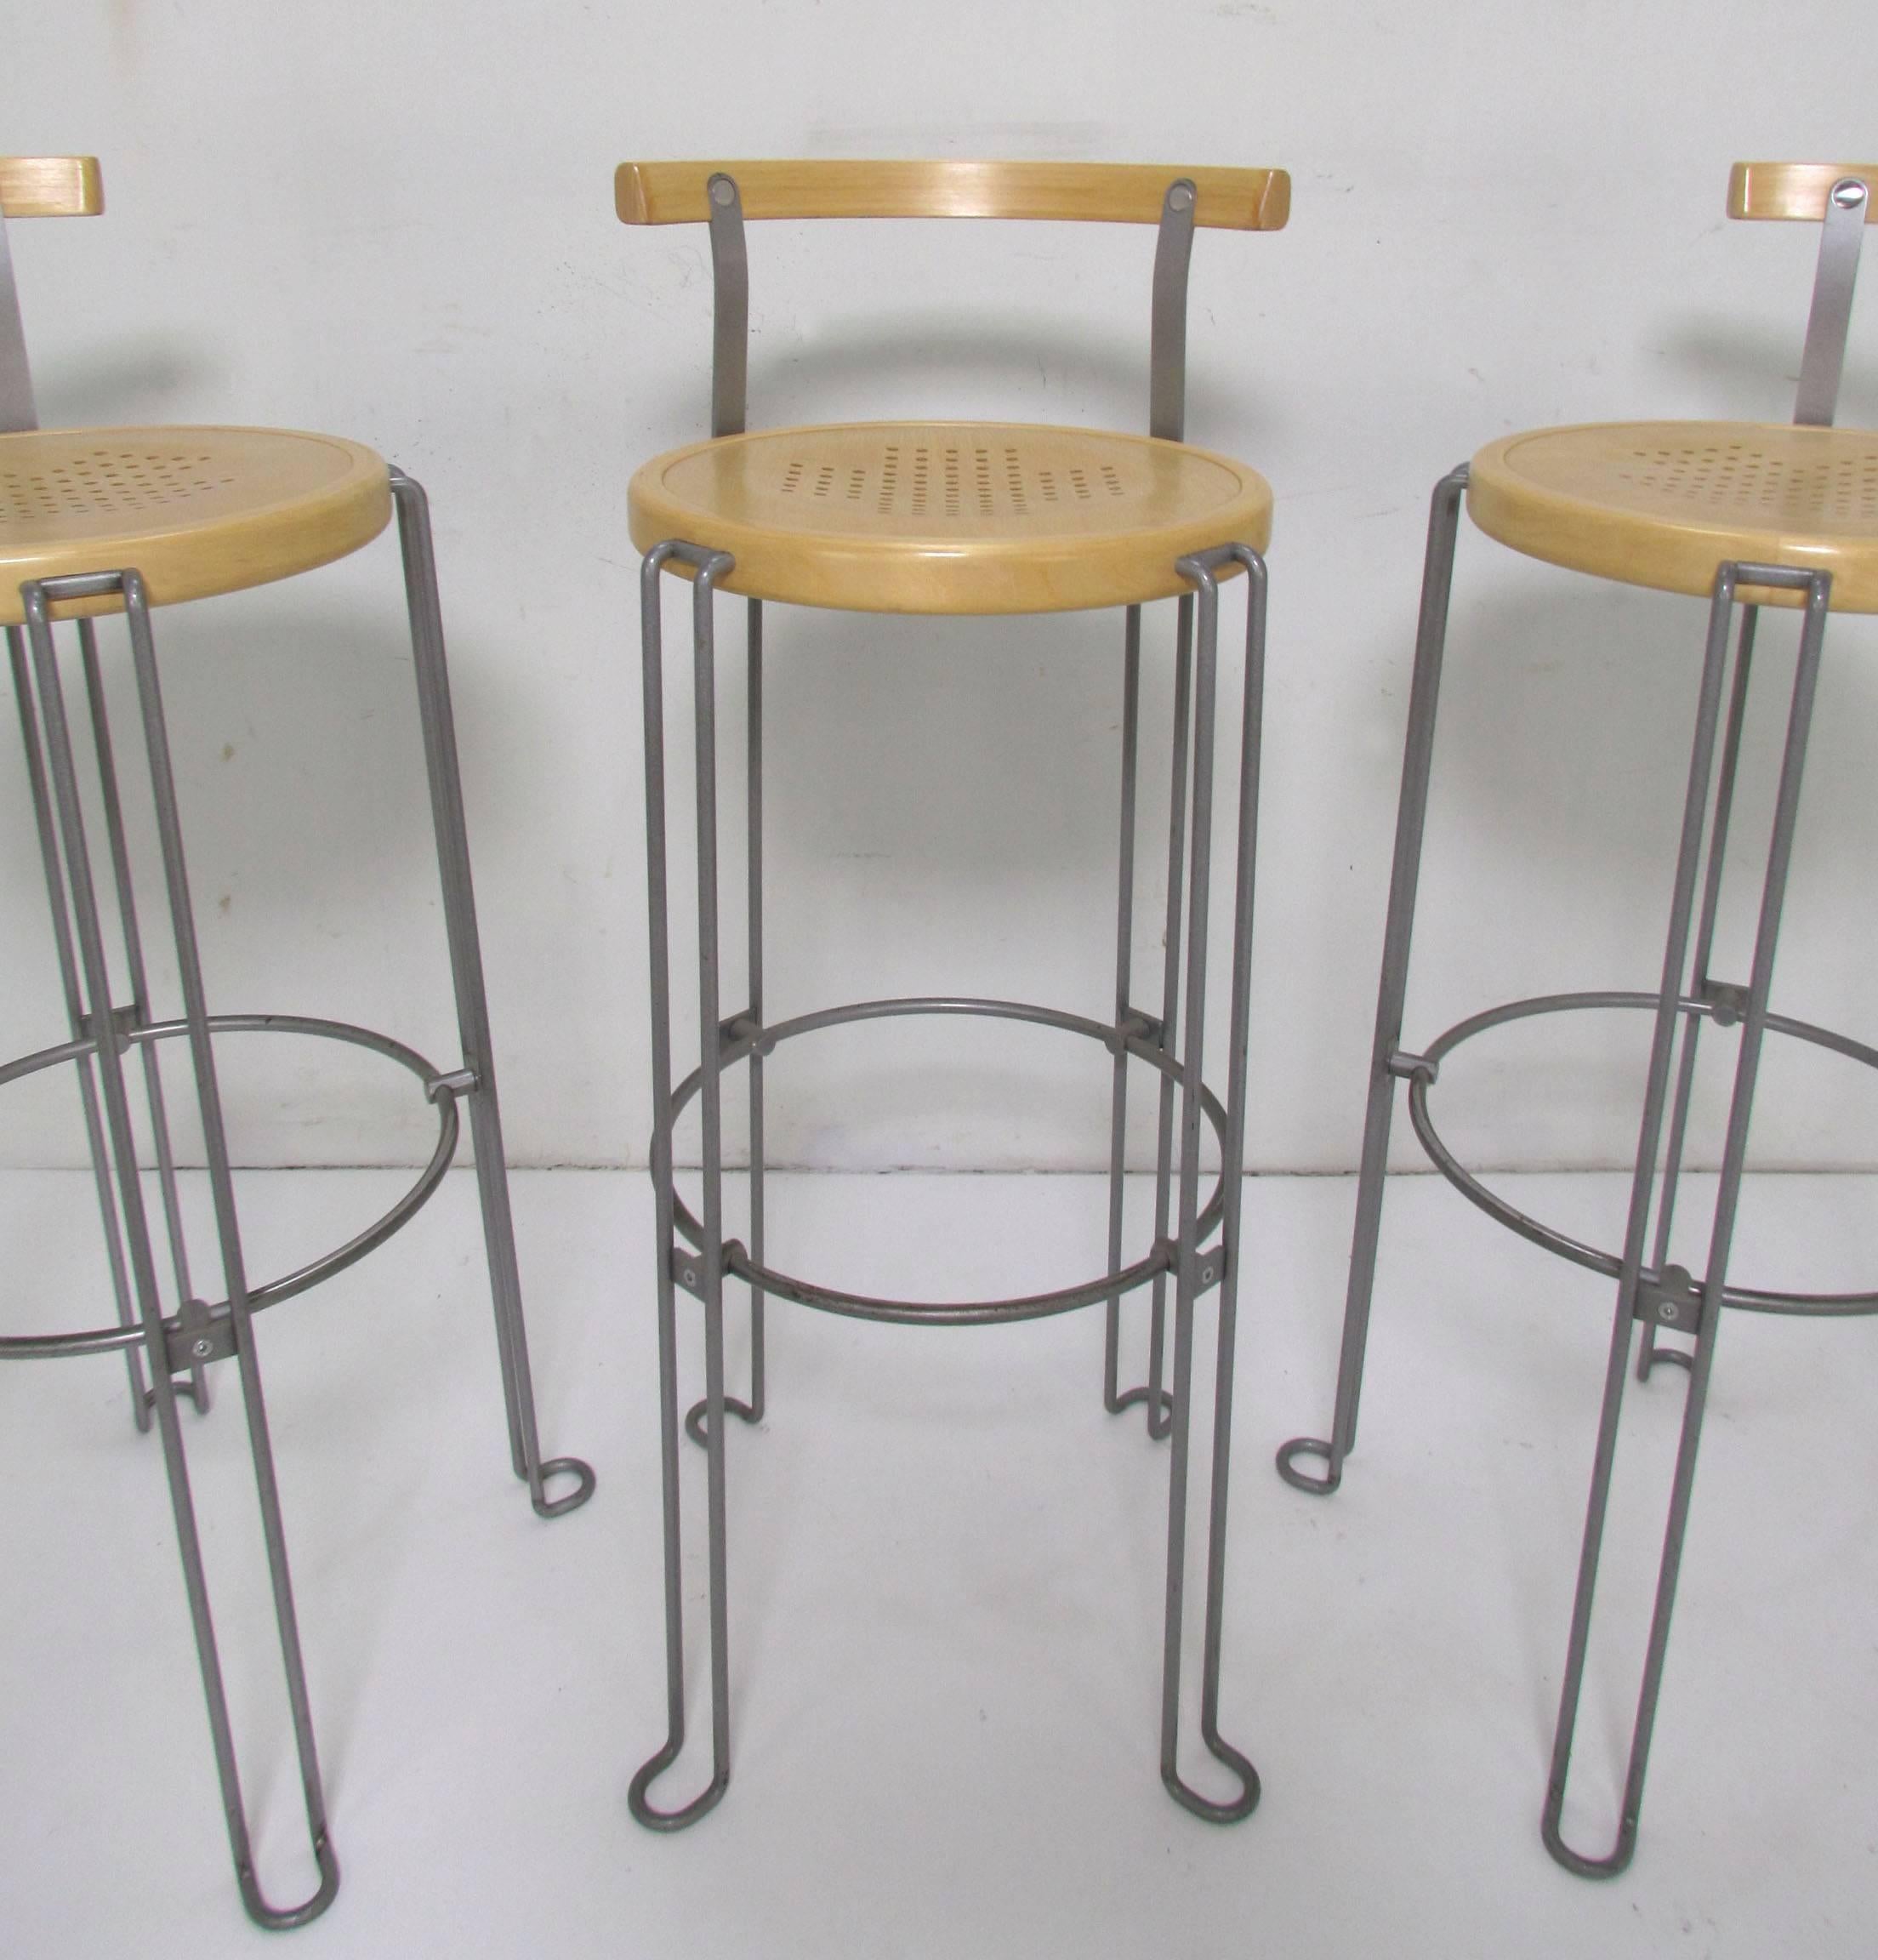 Set of three Postmodern industrial style bar stools in birch and steel designed by Borge Lindau for his company Bla Station. This set, model B4-82, first designed in 1986, was produced in 2003. 

Measures: Seat height is 32.25